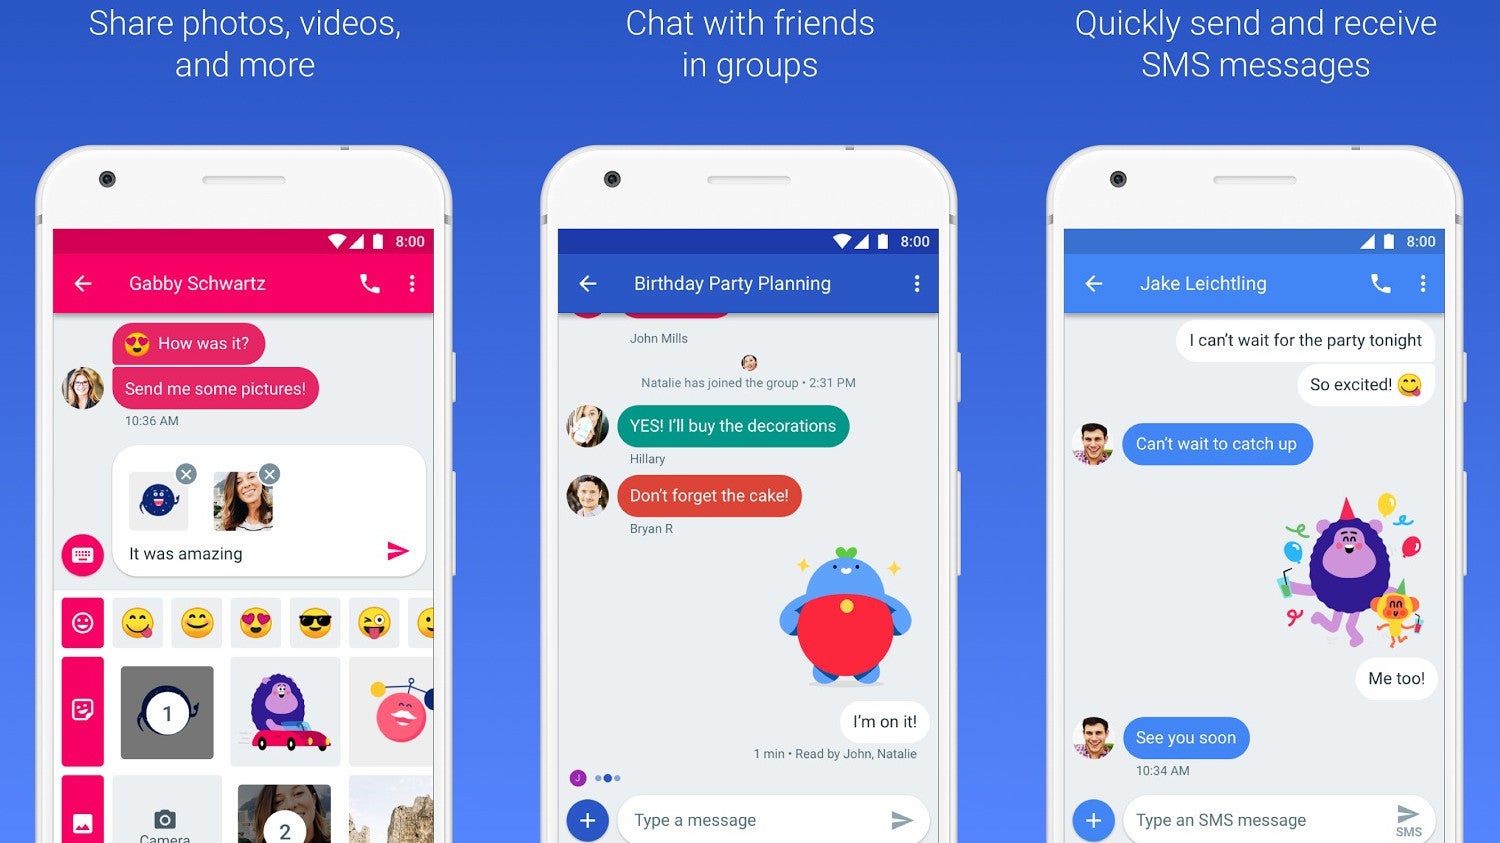 Google and Huawei team up to spread RCS messaging, all Huawei smartphones to get Android Messages app